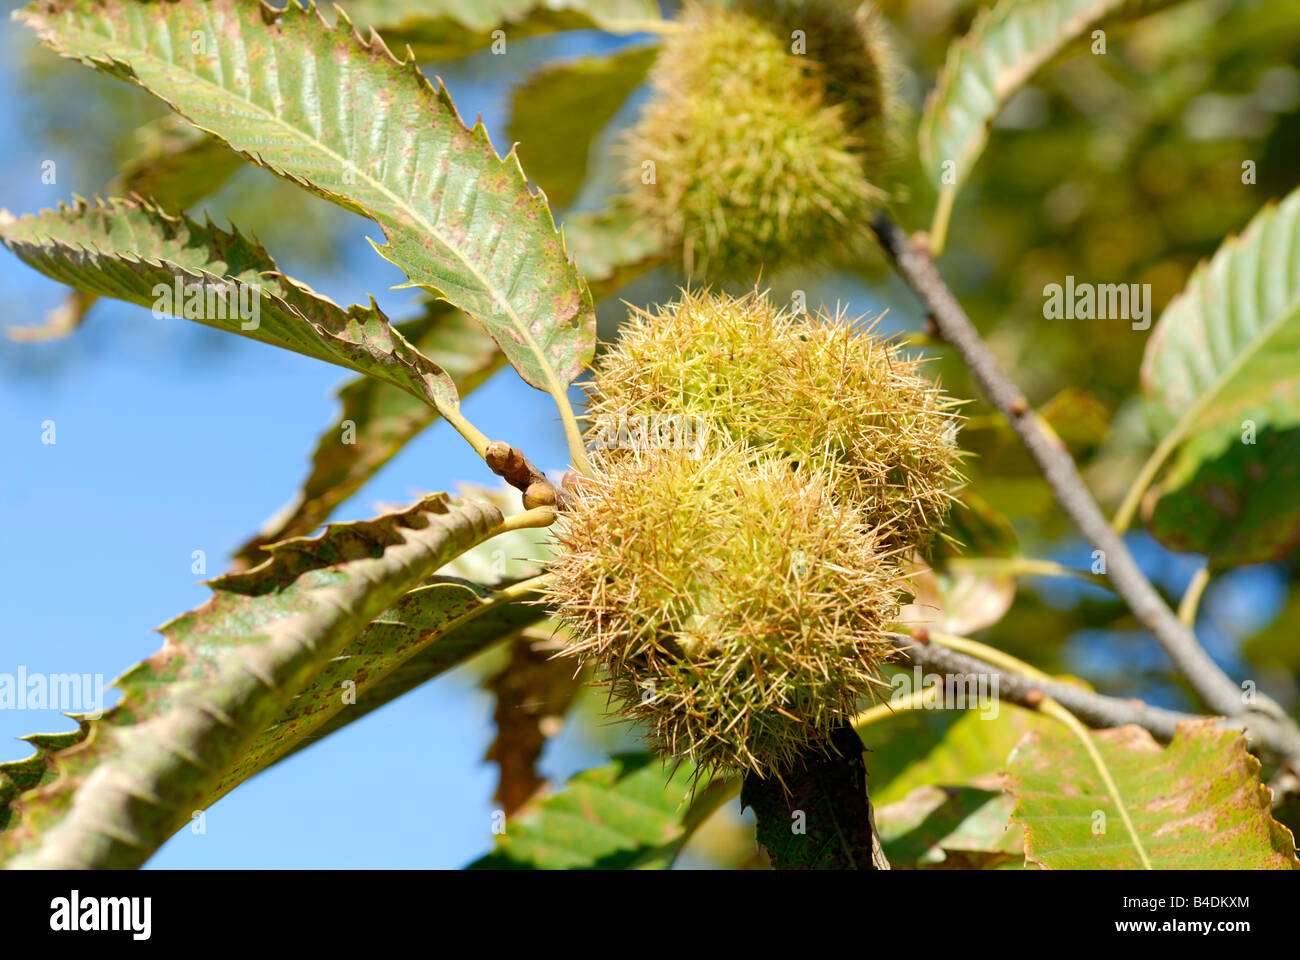 Stock photo of the fruit of the Sweet Chestnut tree Stock Photo